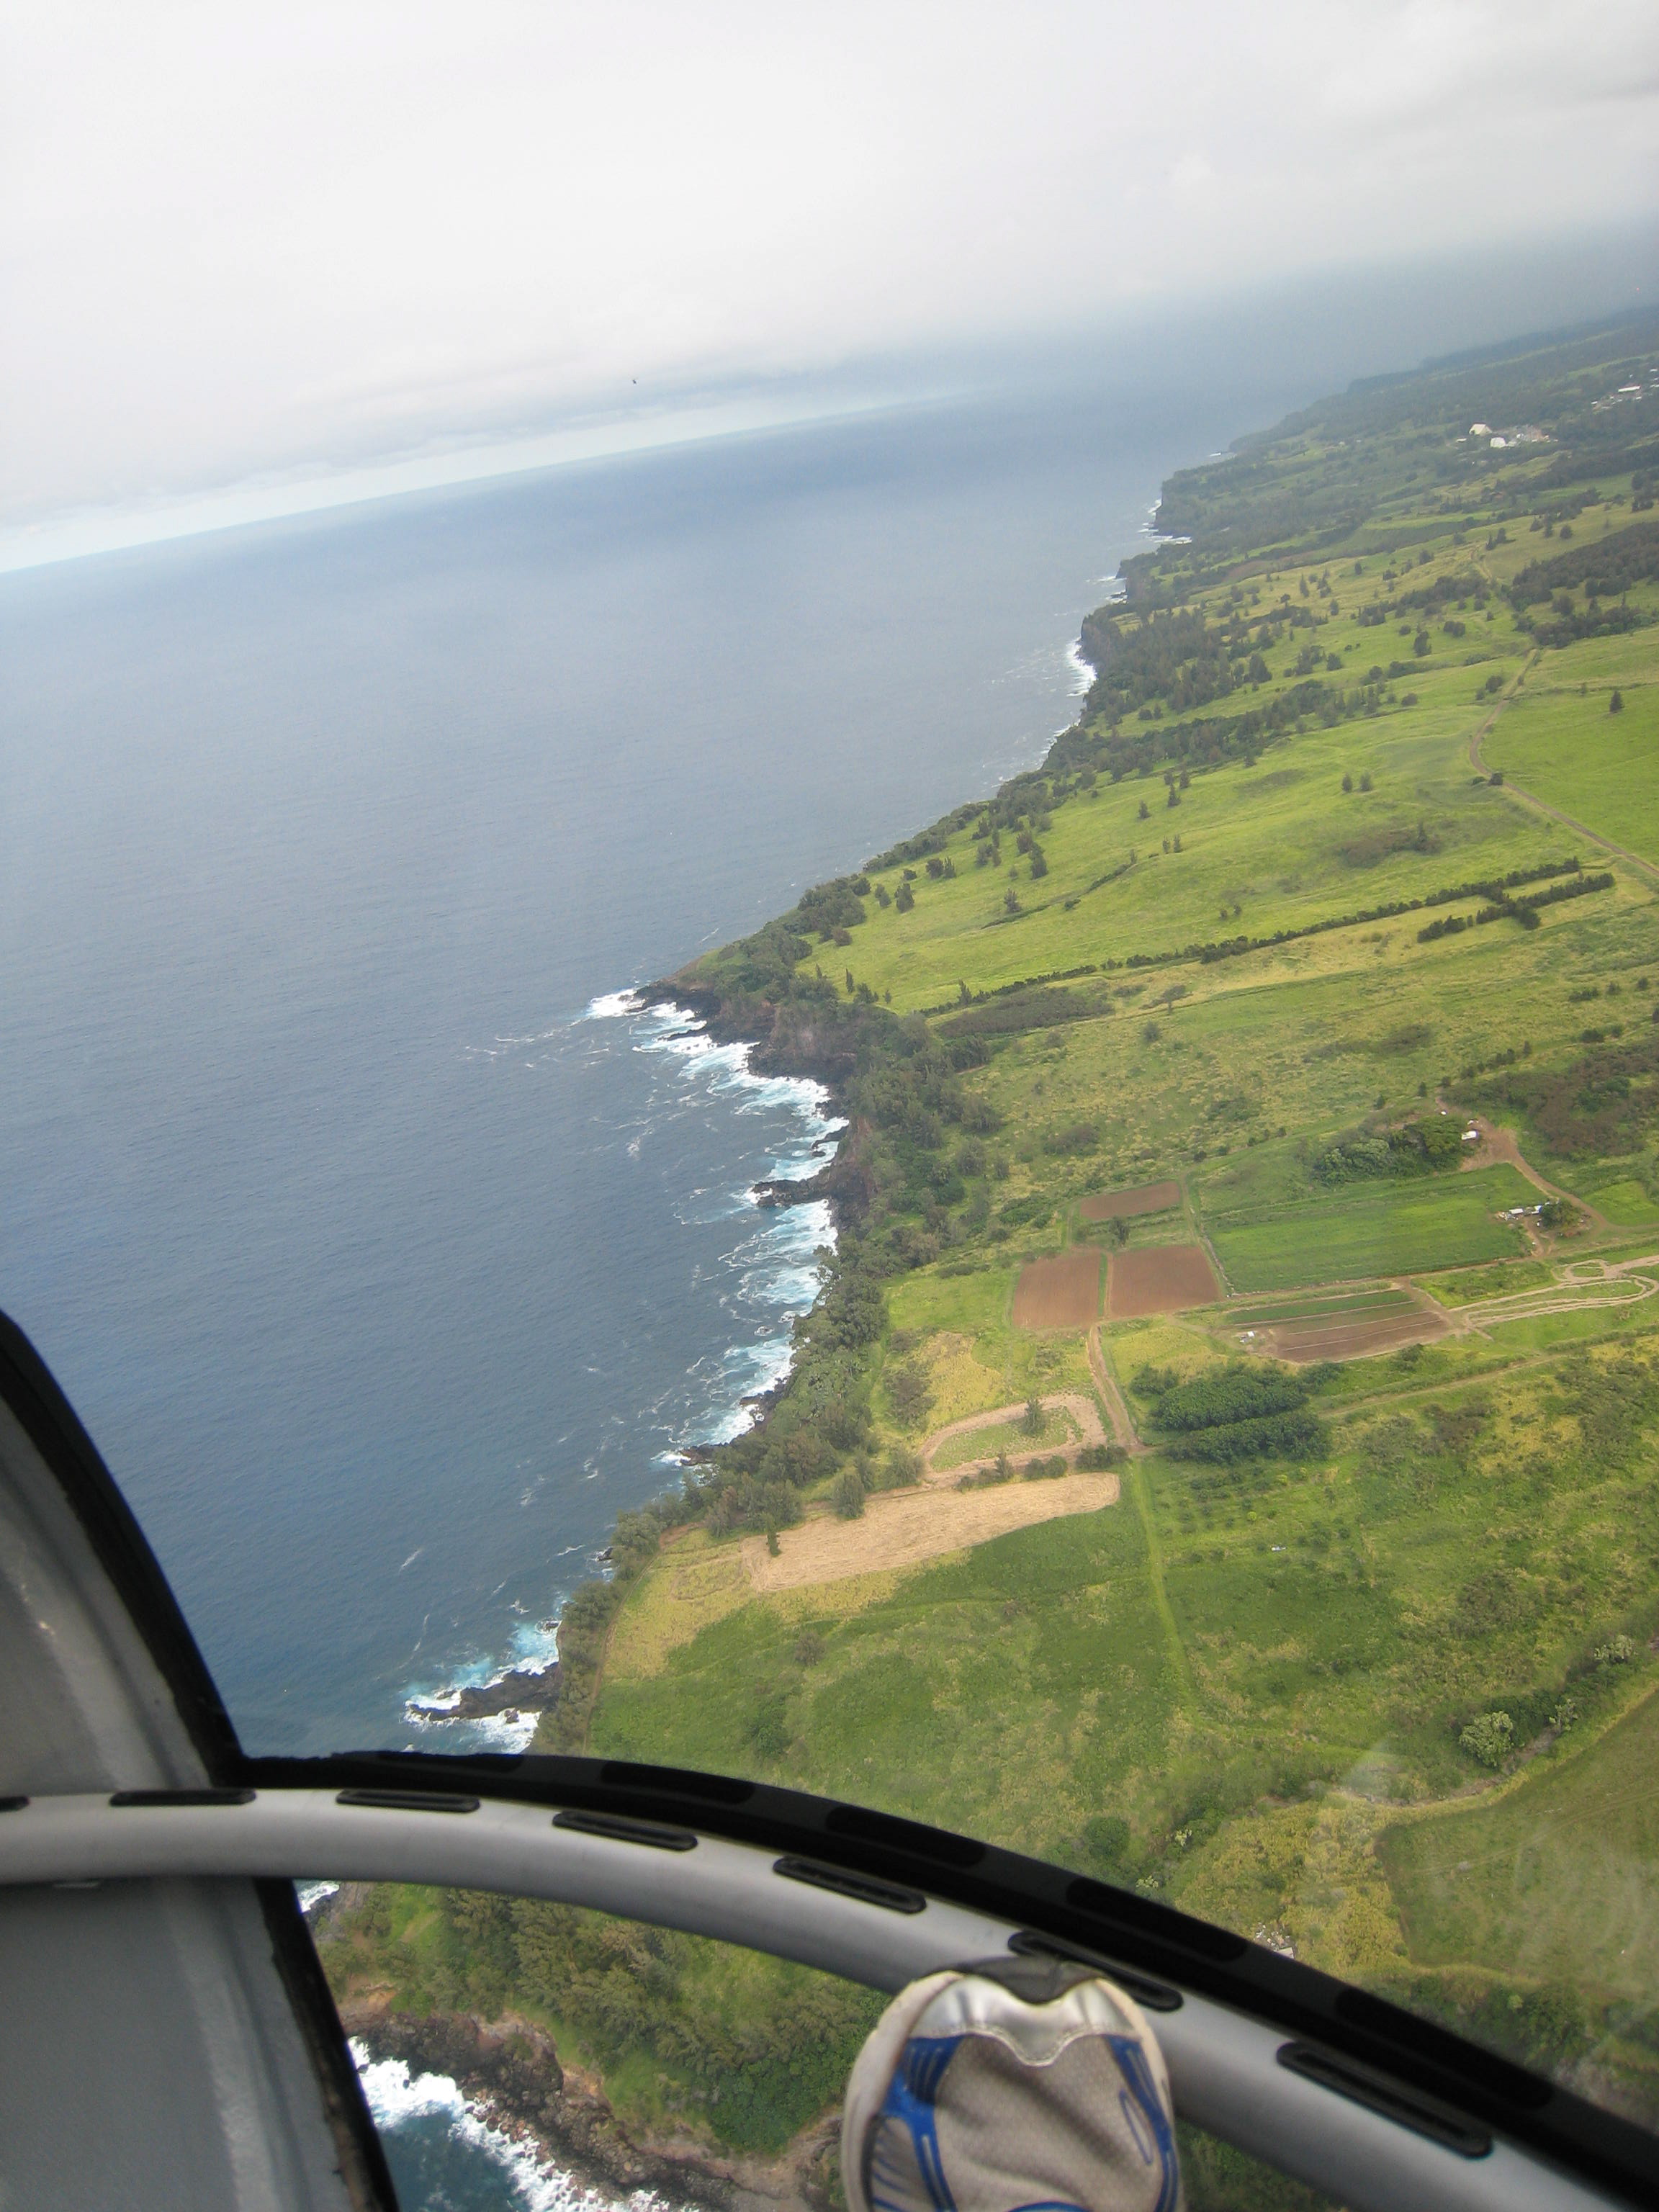 Top 10 Romantic Things to Do Big Island of Hawaii - Helicopter Ride